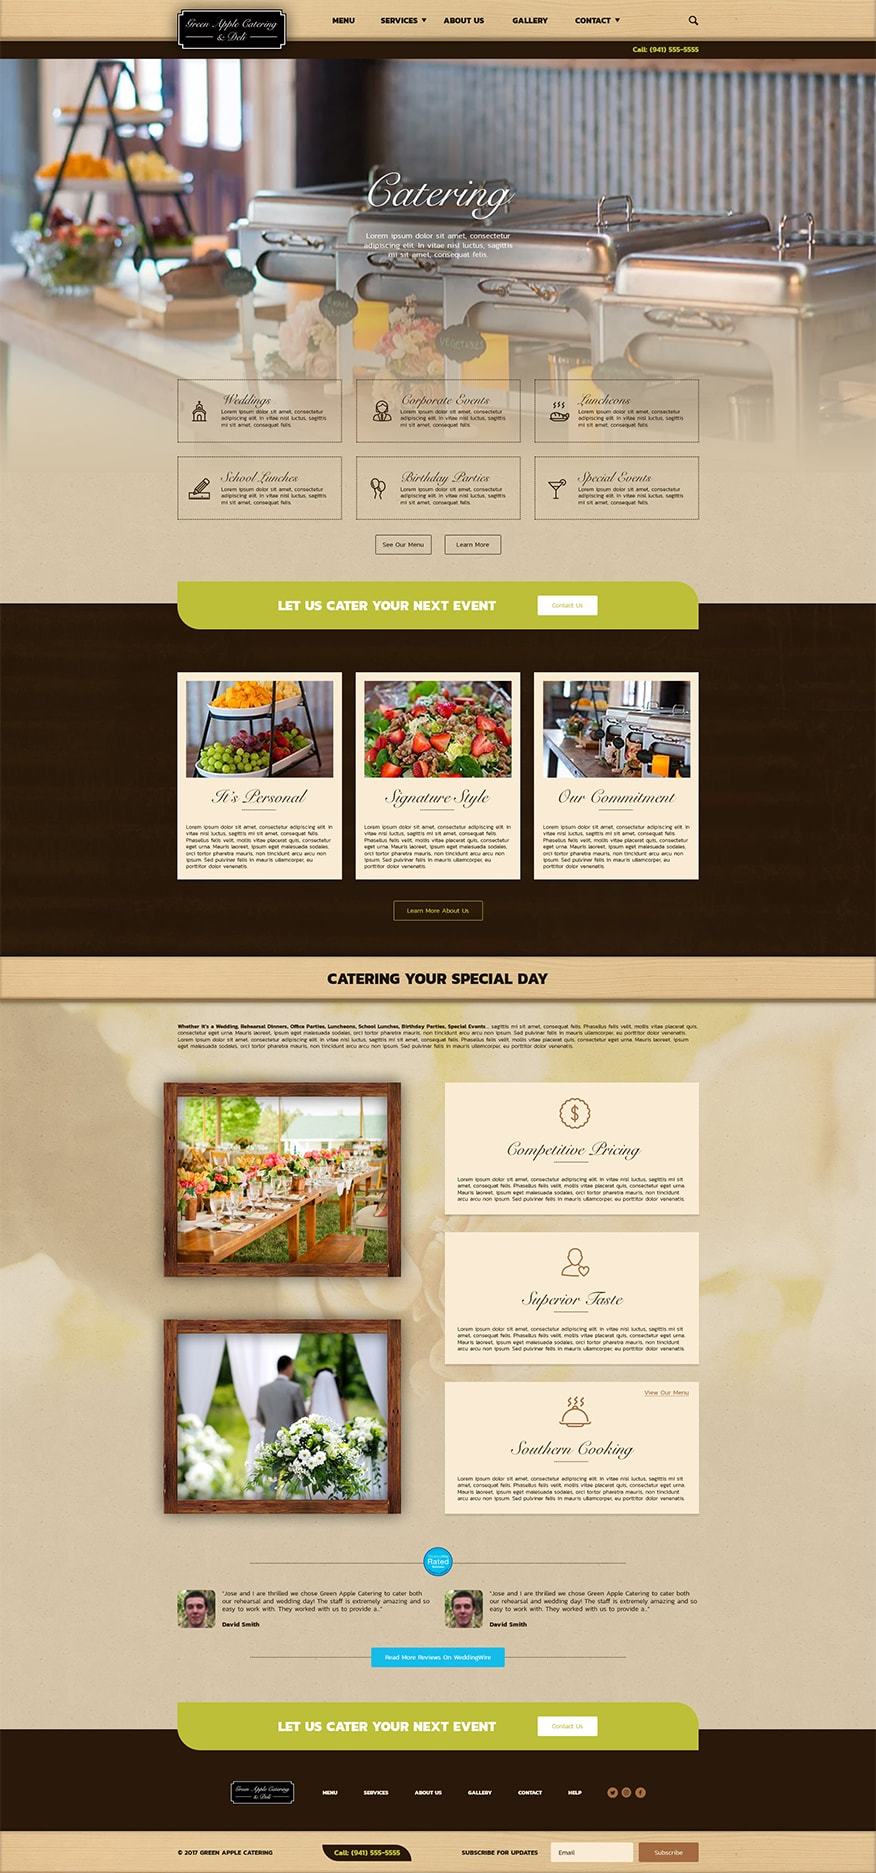 A page from the website redesign Web Jarvis did for Green Apple Catering.